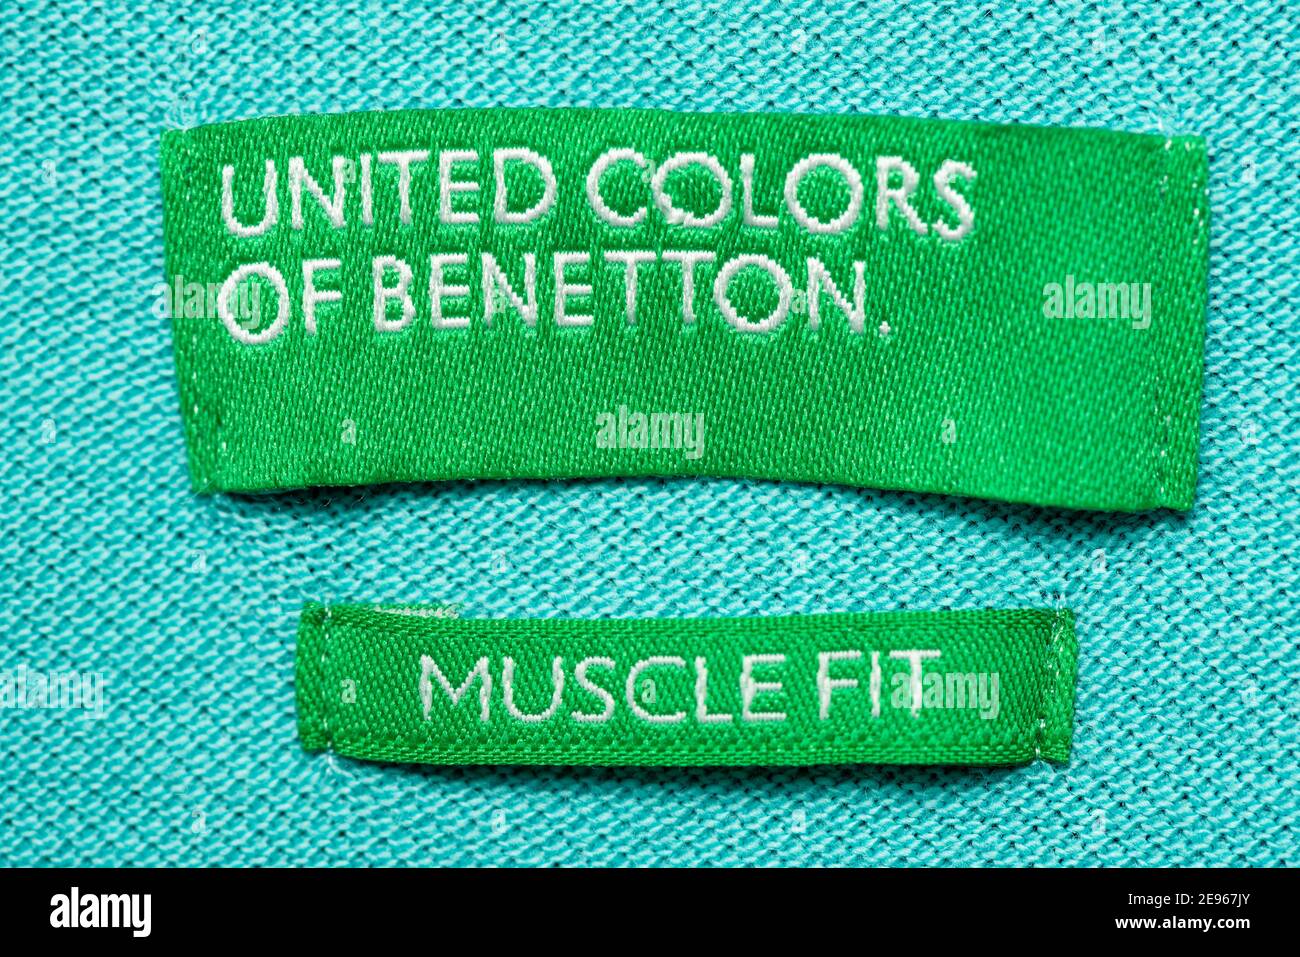 United colors of benetton hi-res stock photography and images - Page 2 -  Alamy